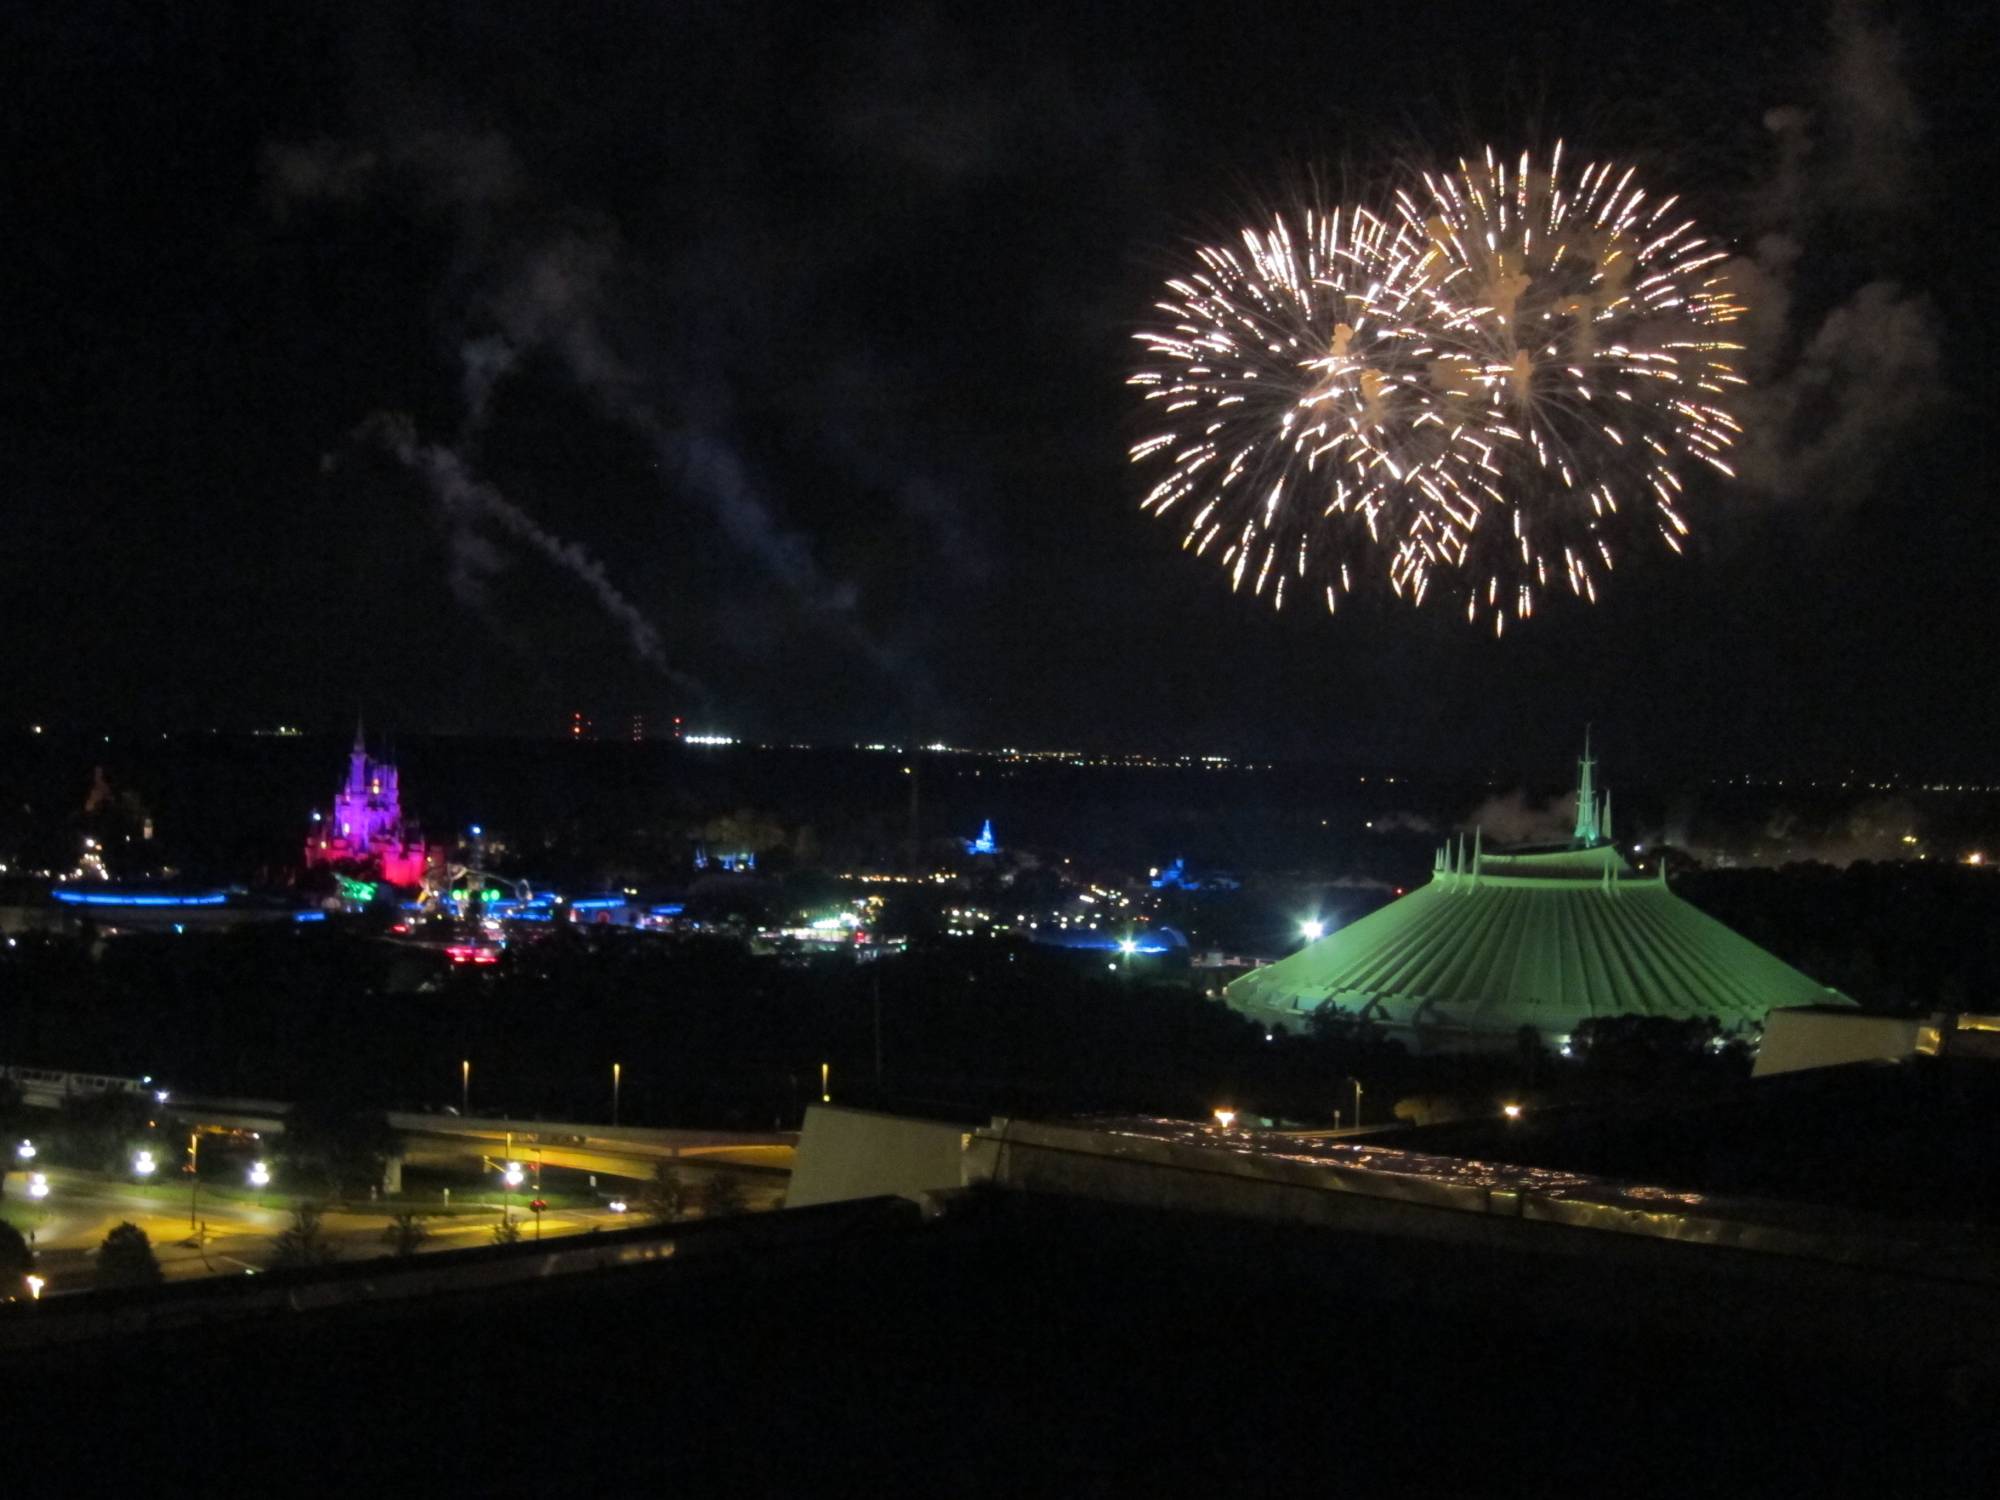 Wishes Fireworks Viewing Suggestions |PassPorter.com